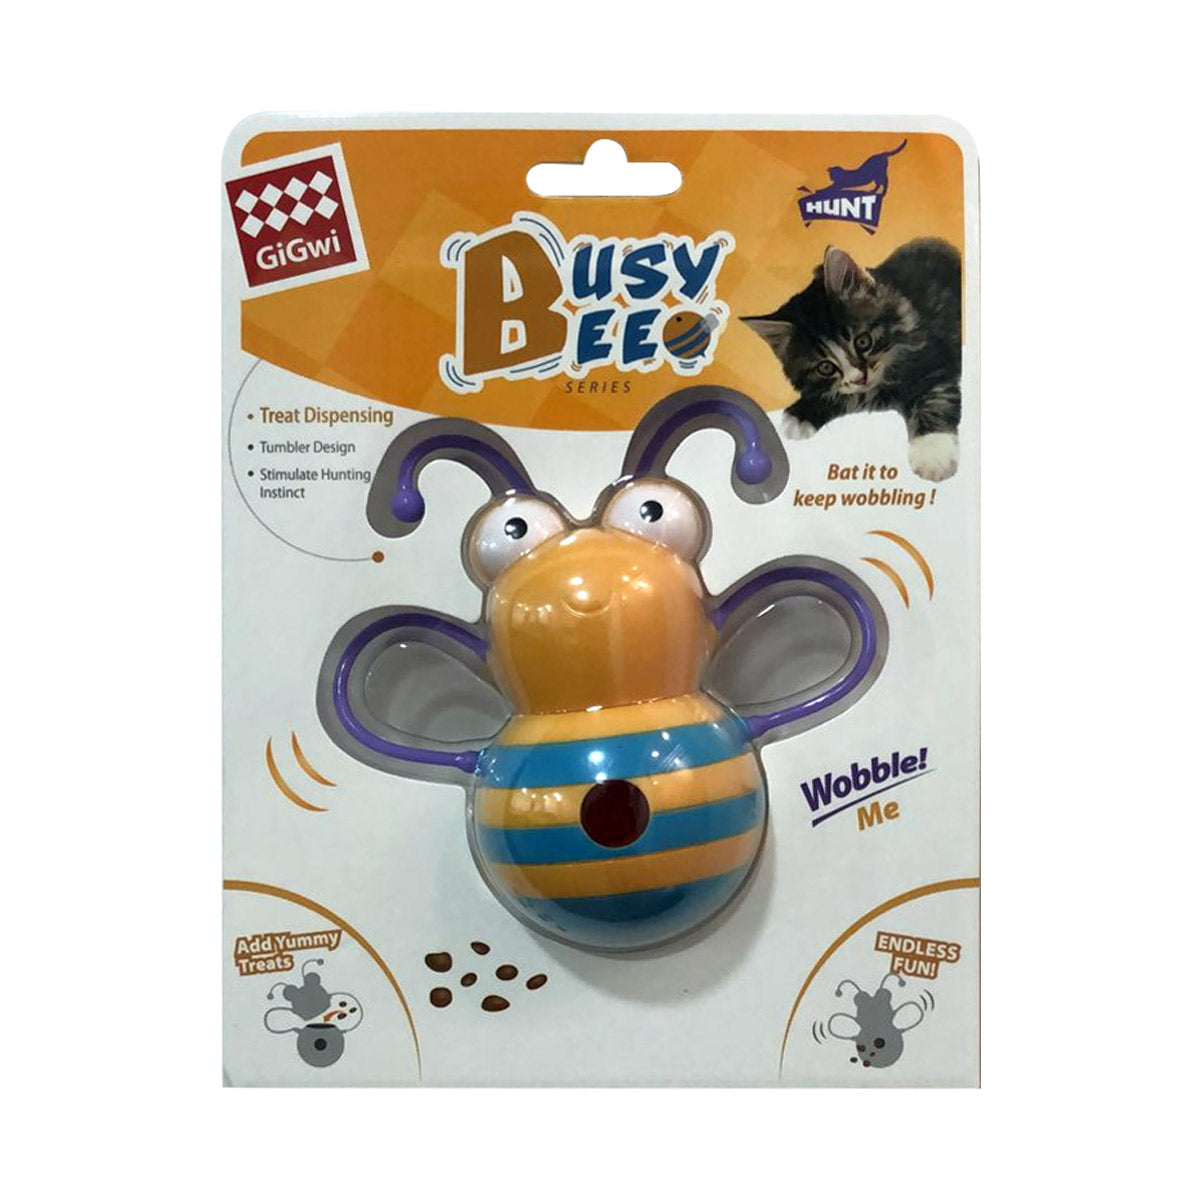 GIGWI Busy Bee Treat Dispenser Infused Catnip Oil